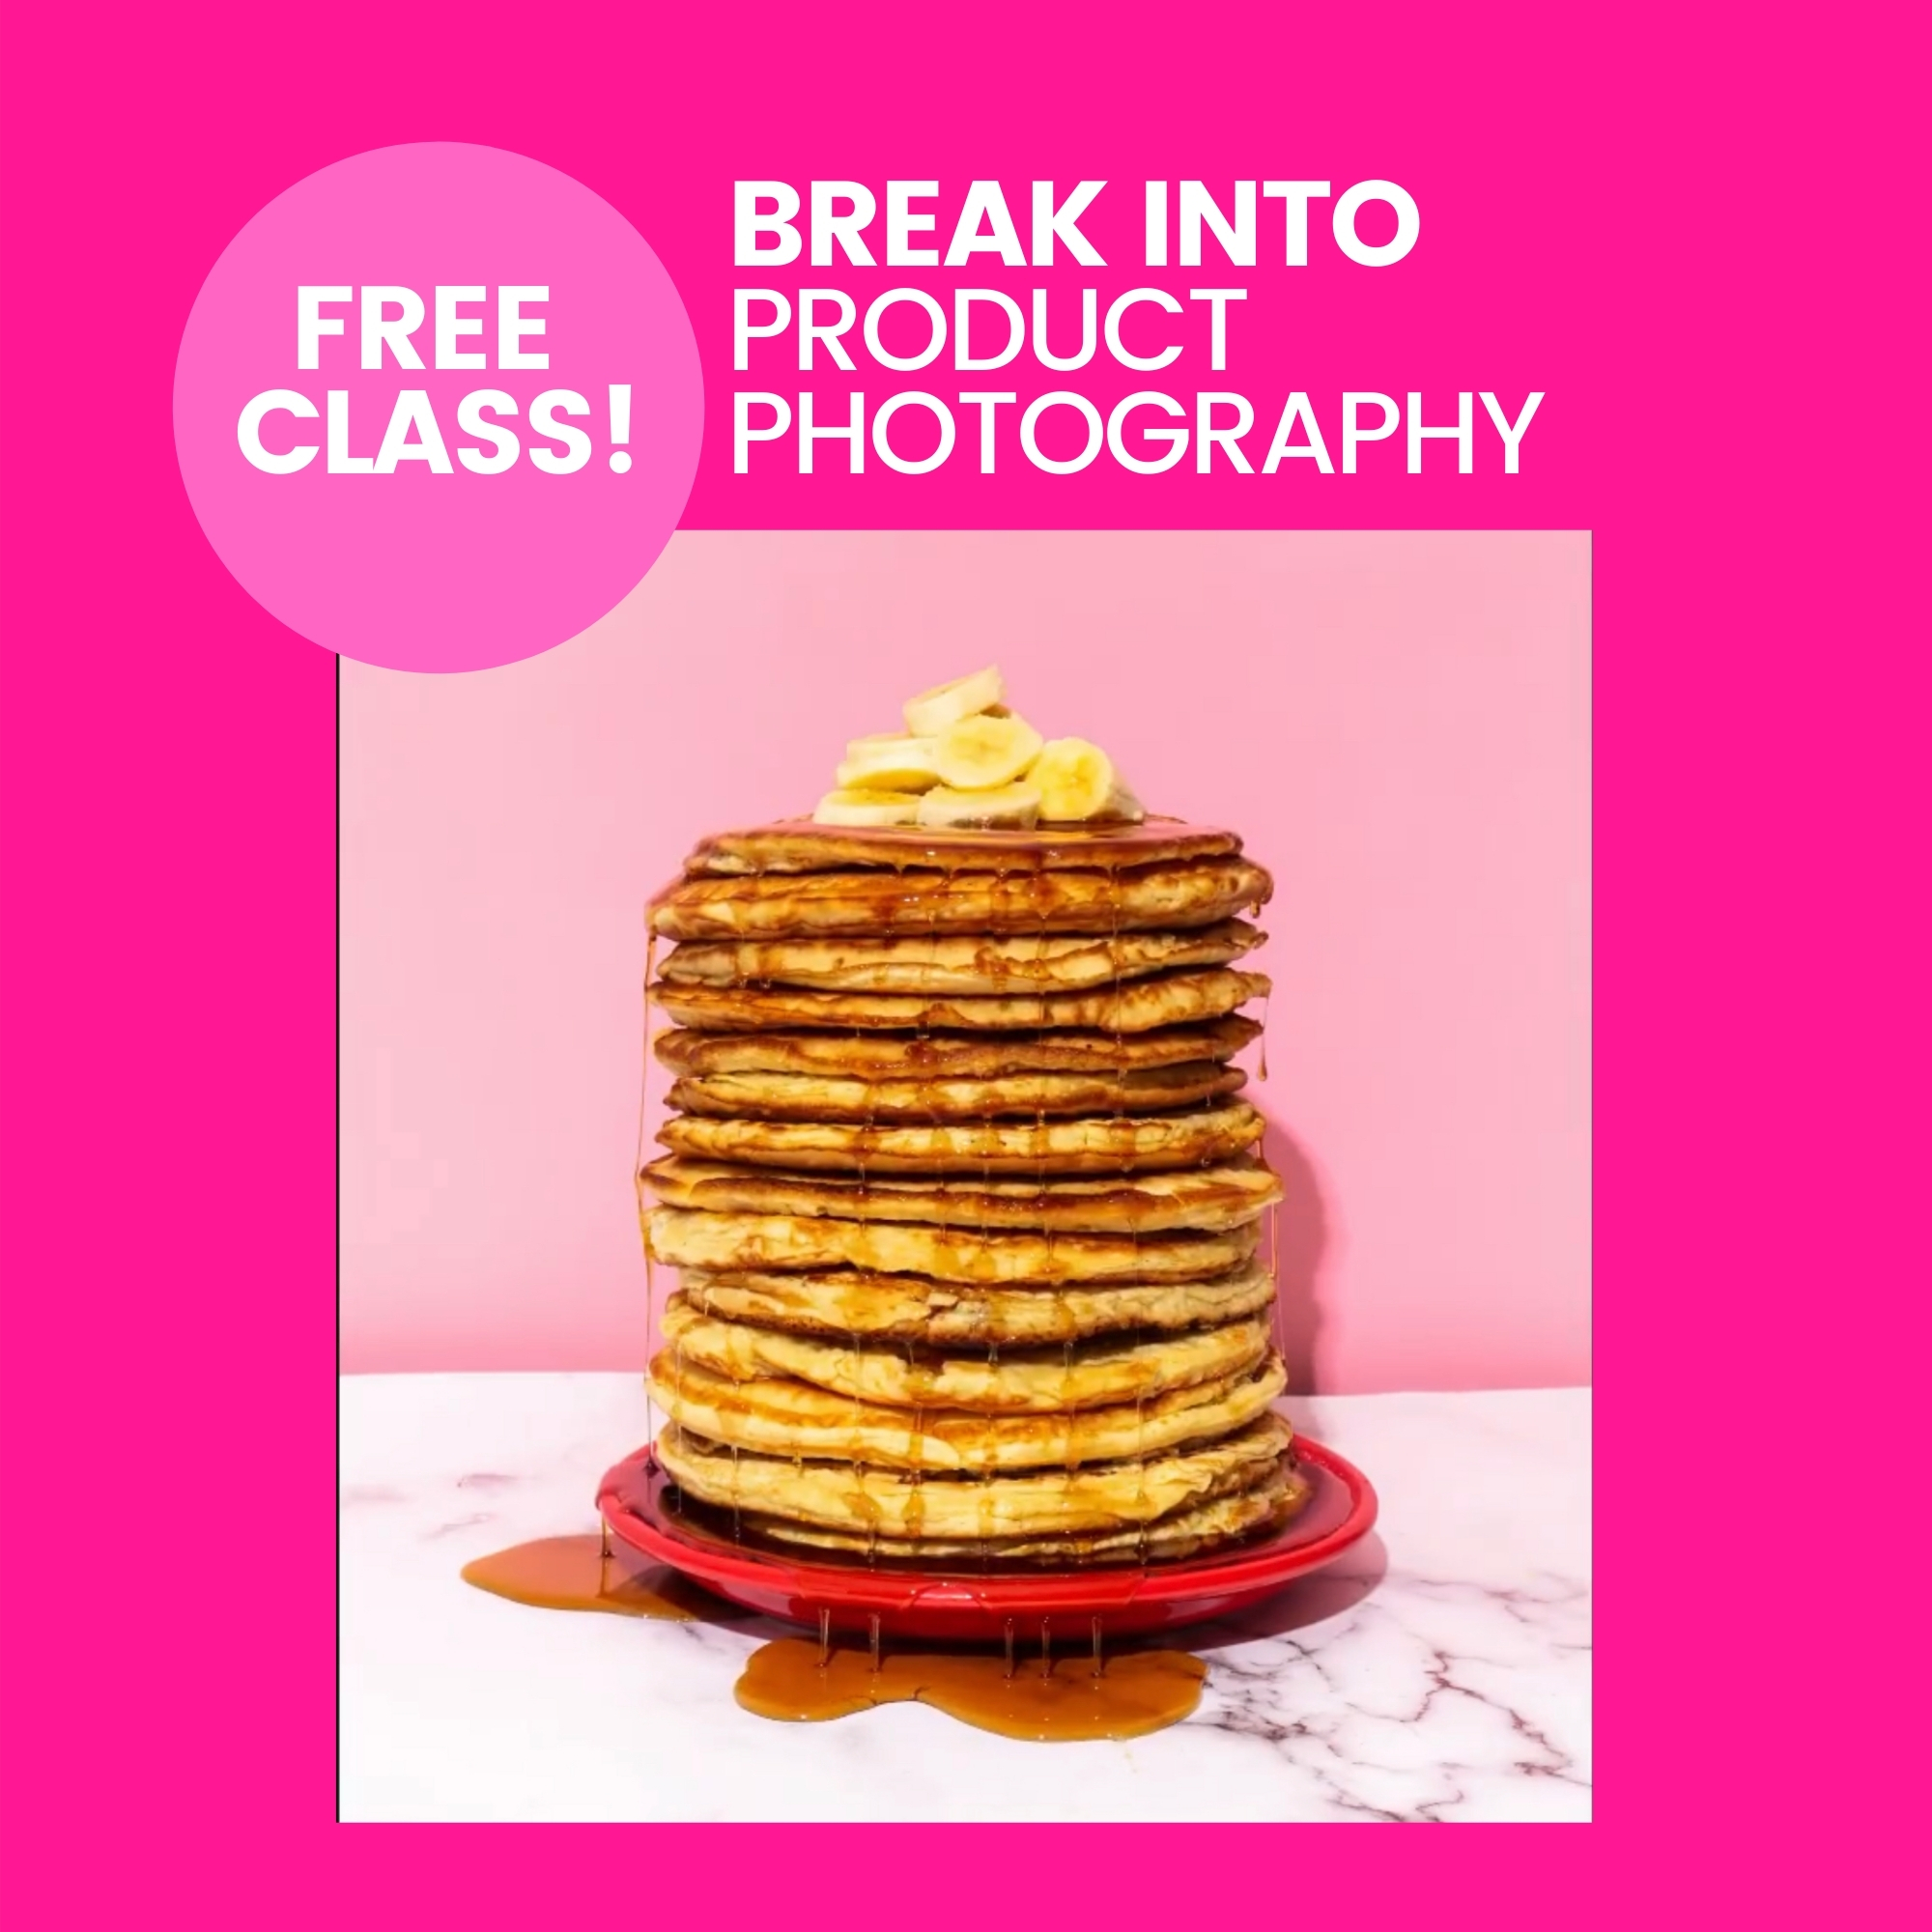 photo of pancakes promoting free course, break into product photography